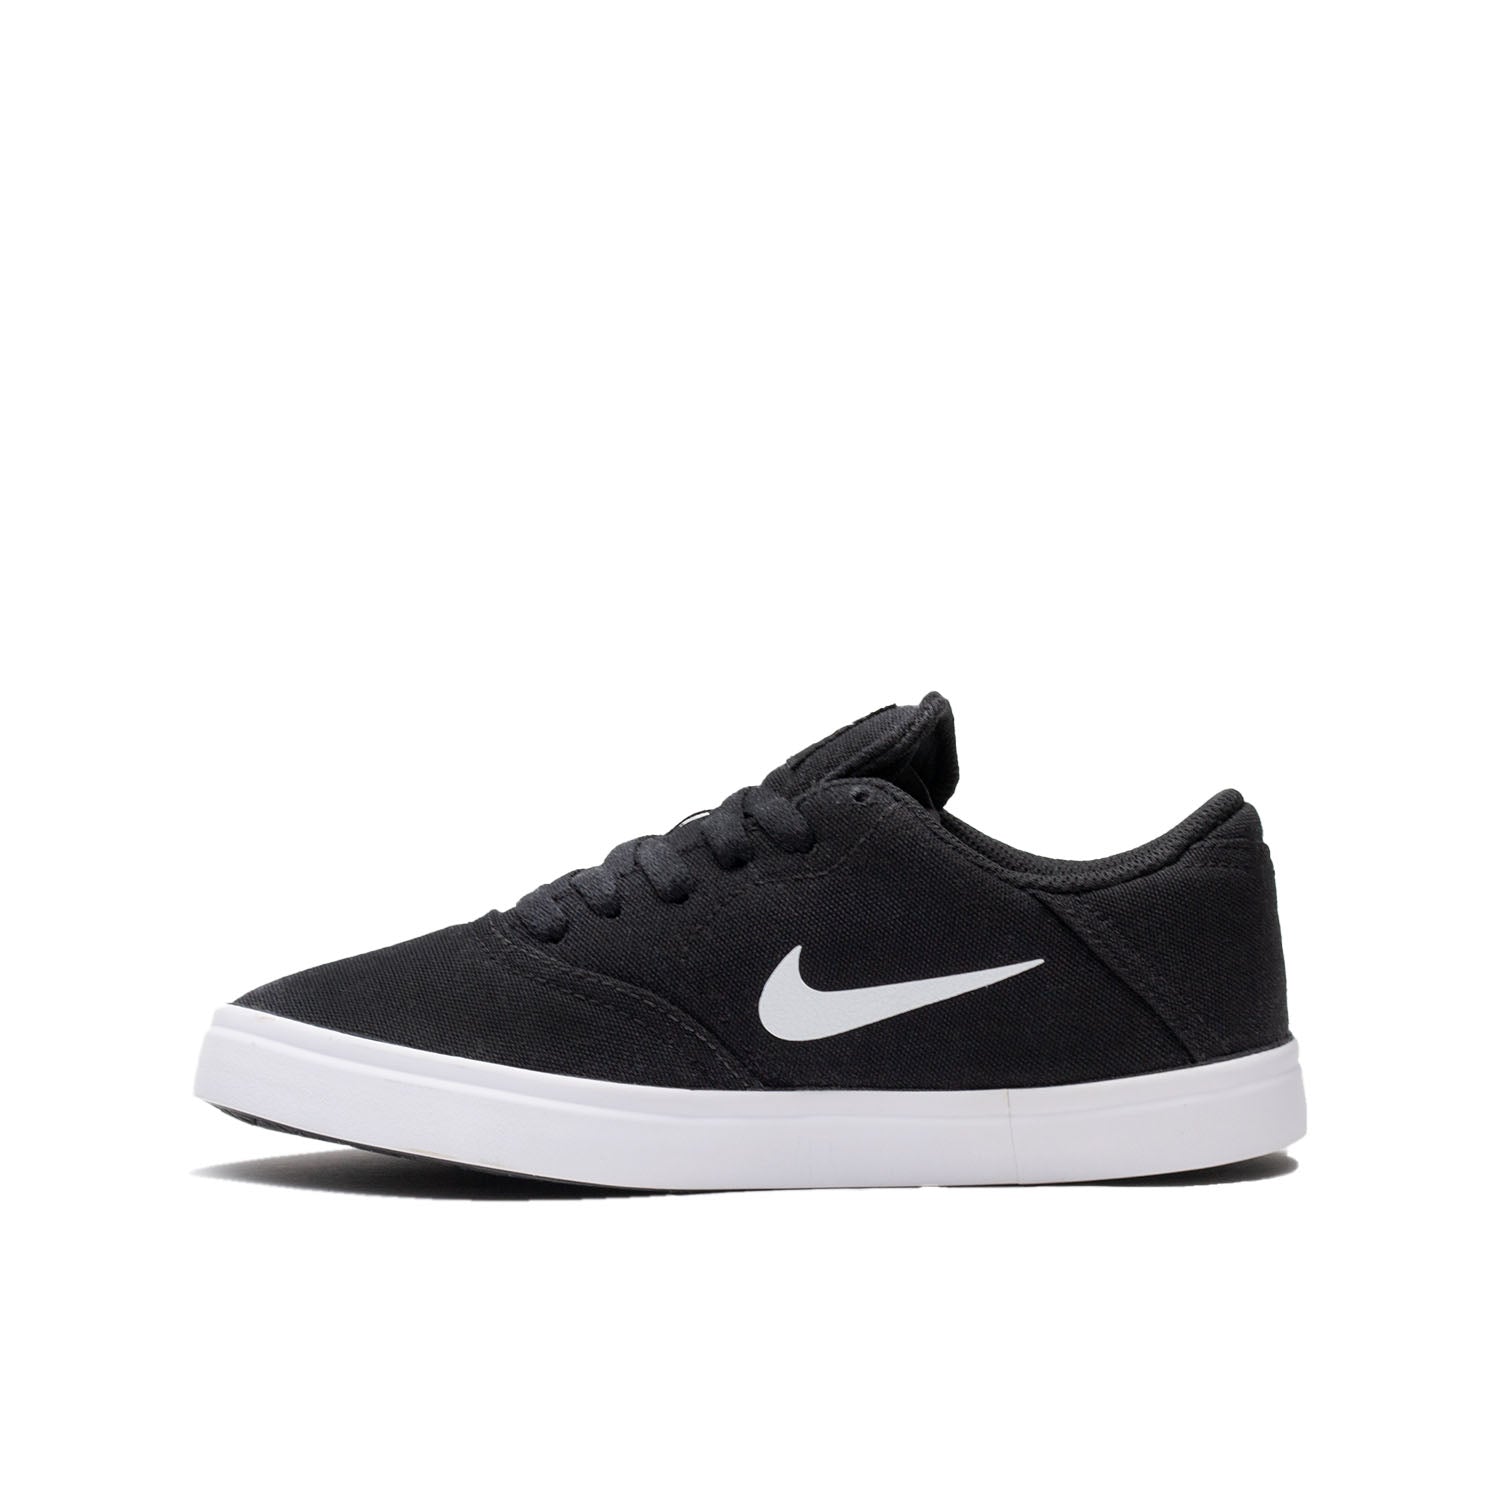 Nike SB - Check Canvas (Grade School) - 905373-003 Black with white sole youth skate shoe footwear